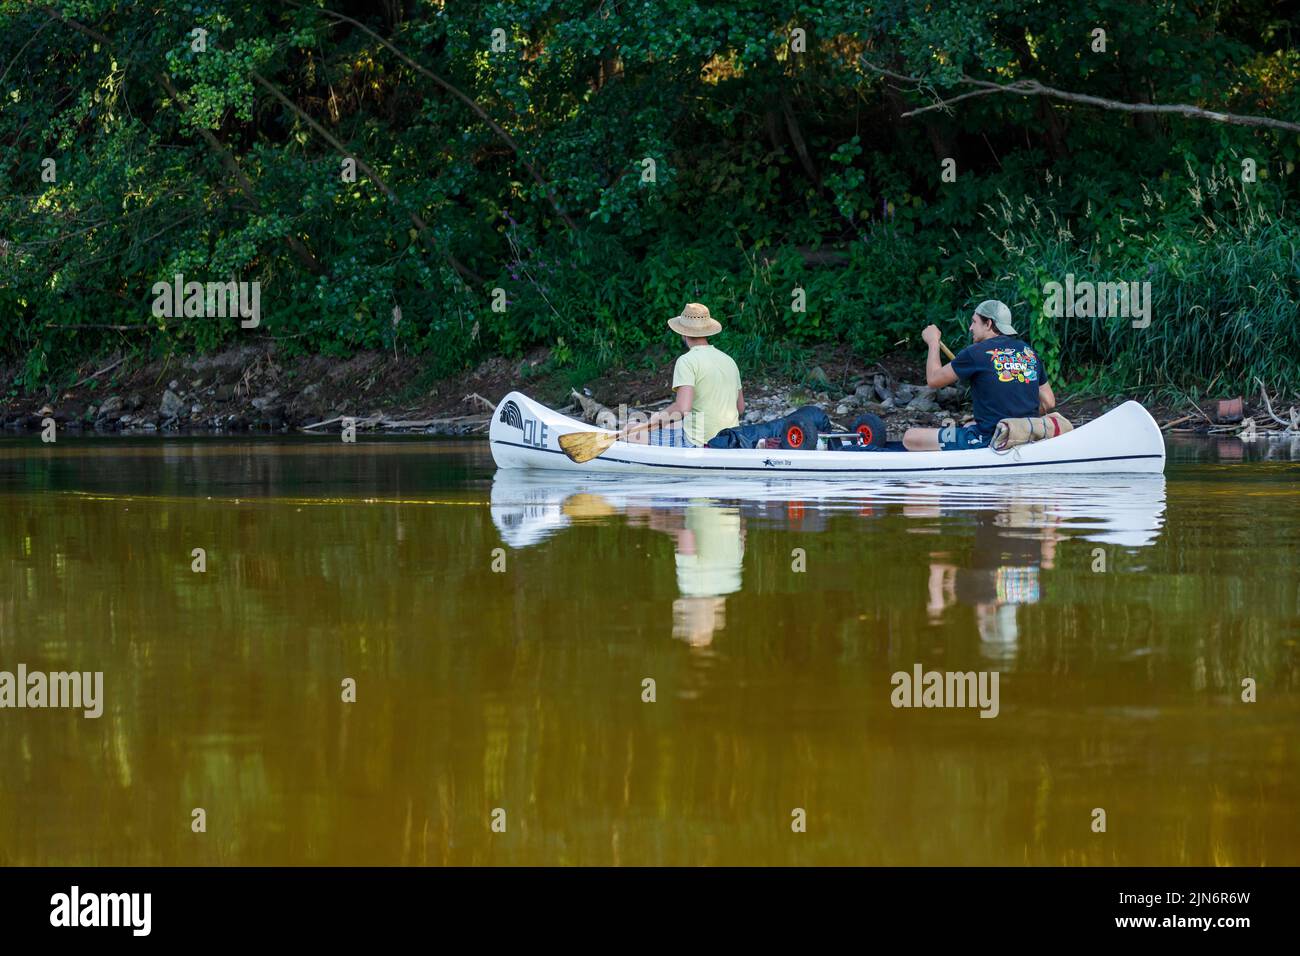 Canoeing and kayaking on a river Stock Photo